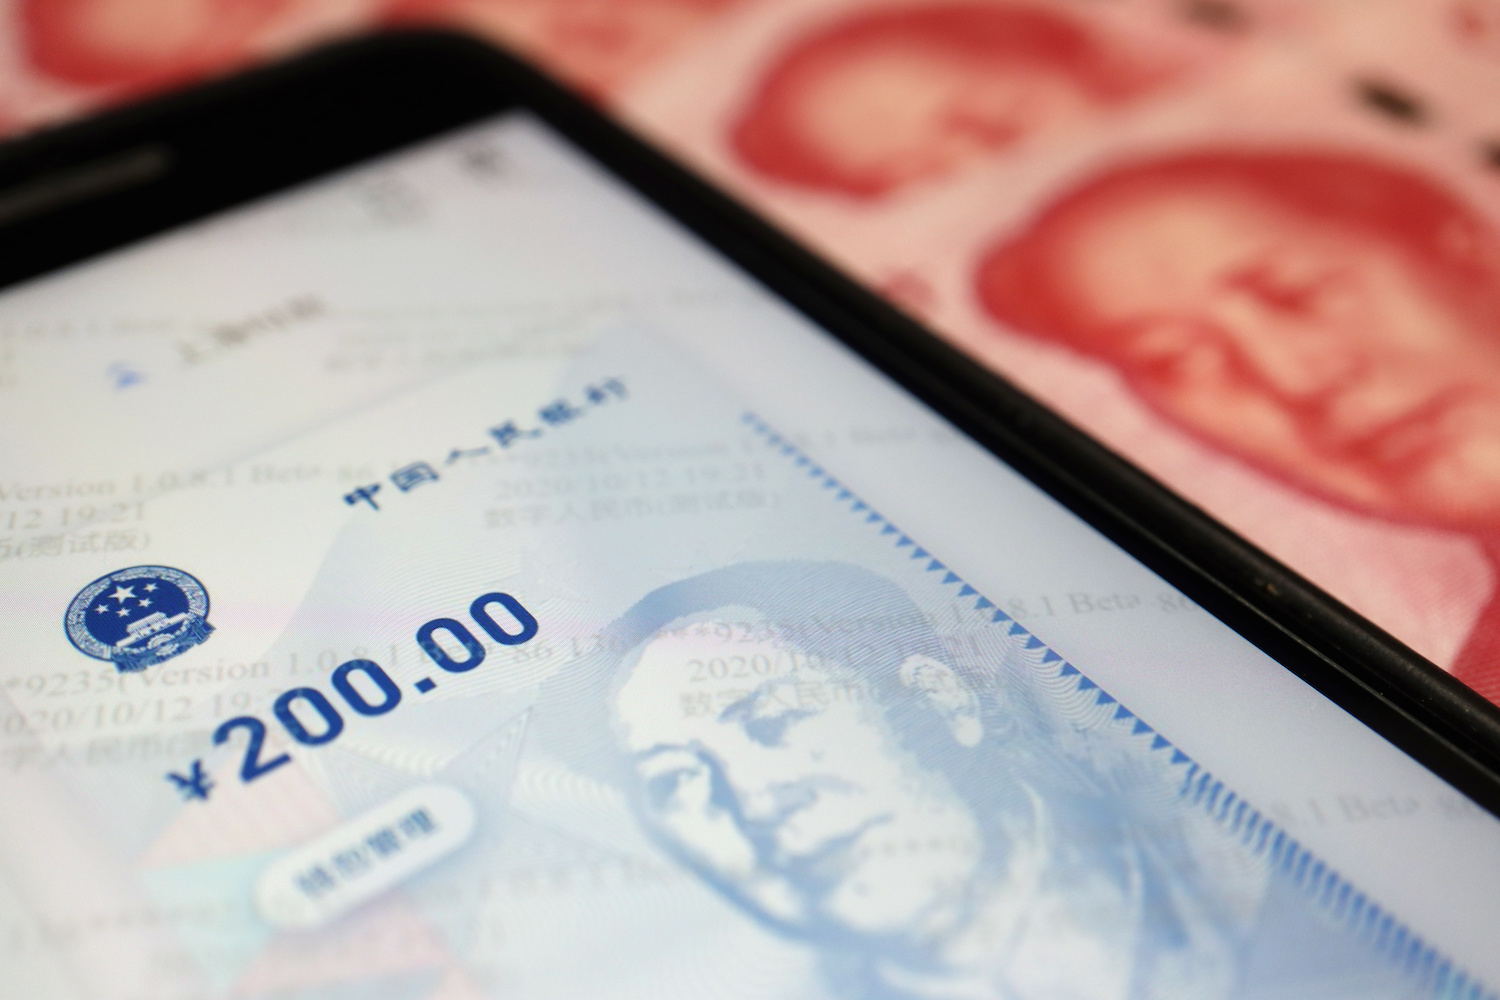 Three US Senators introduce legislation to ban apps that support the digital yuan, citing national security around the new fintech.